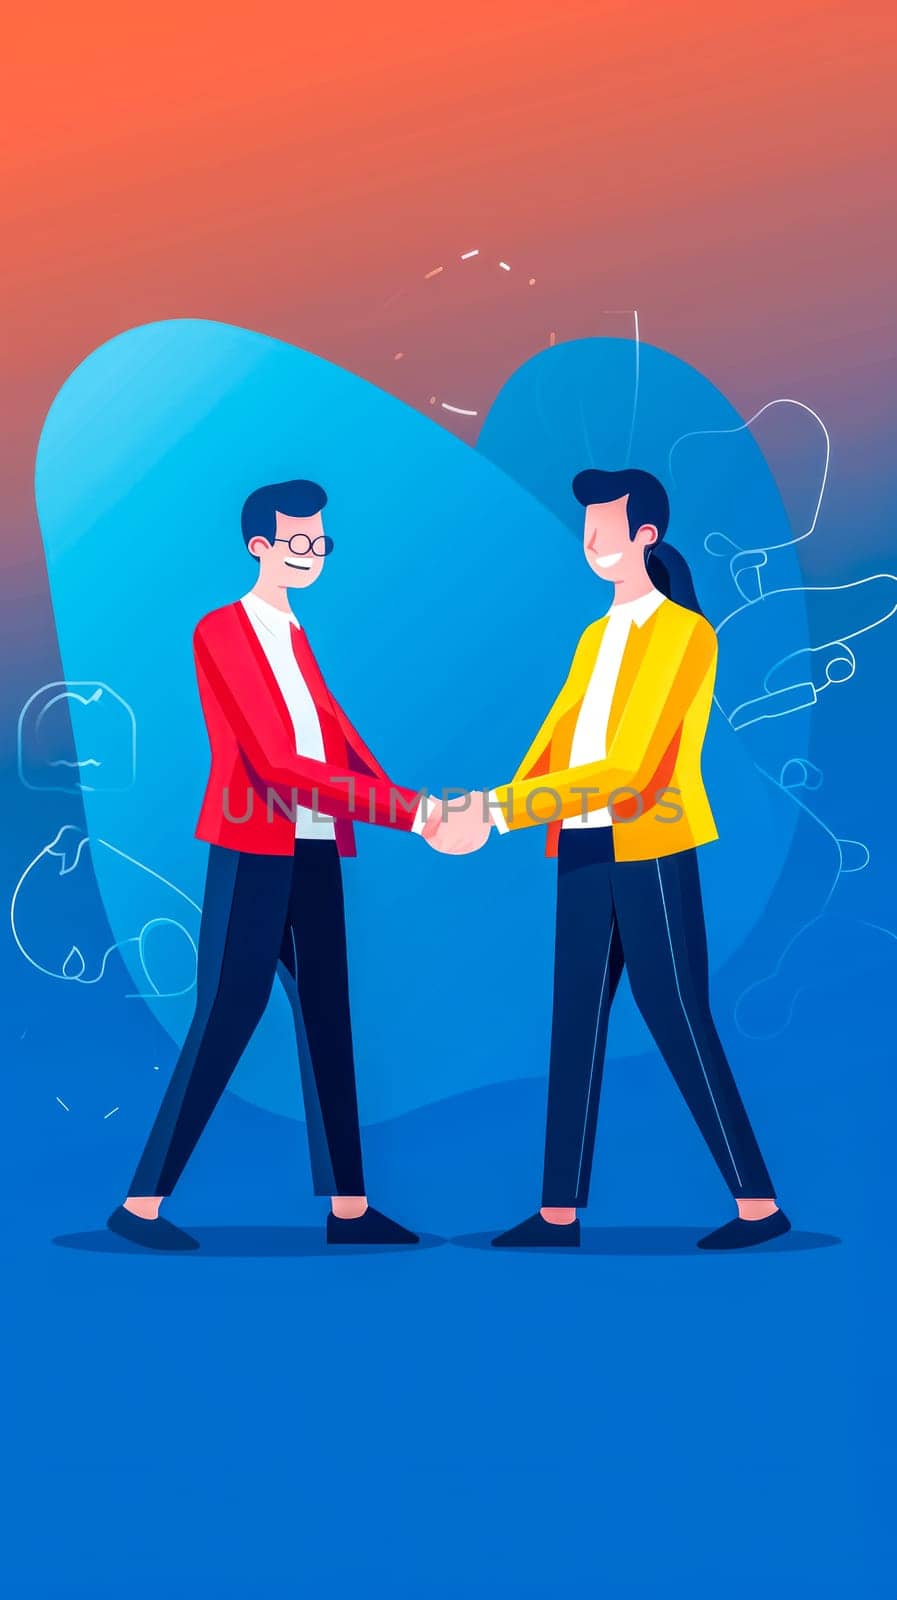 the conclusion of agreements, stylized people in suits shaking hands, one wearing glasses and a red jacket, the other in a yellow jacket, against a gradient blue to red background with abstract shapes by Edophoto